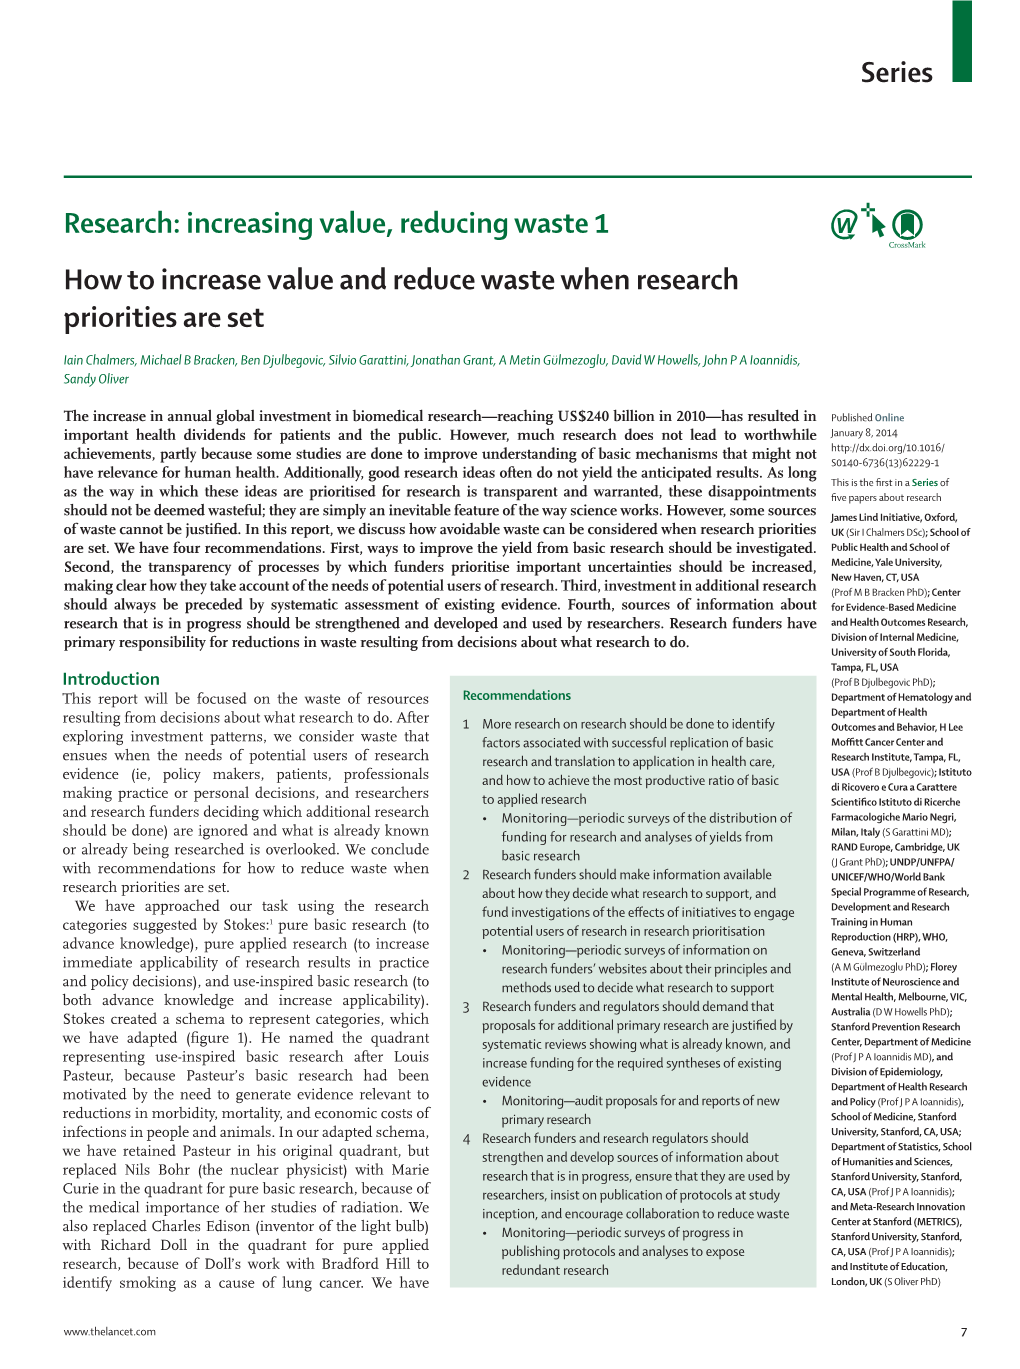 How to Increase Value and Reduce Waste When Research Priorities Are Set